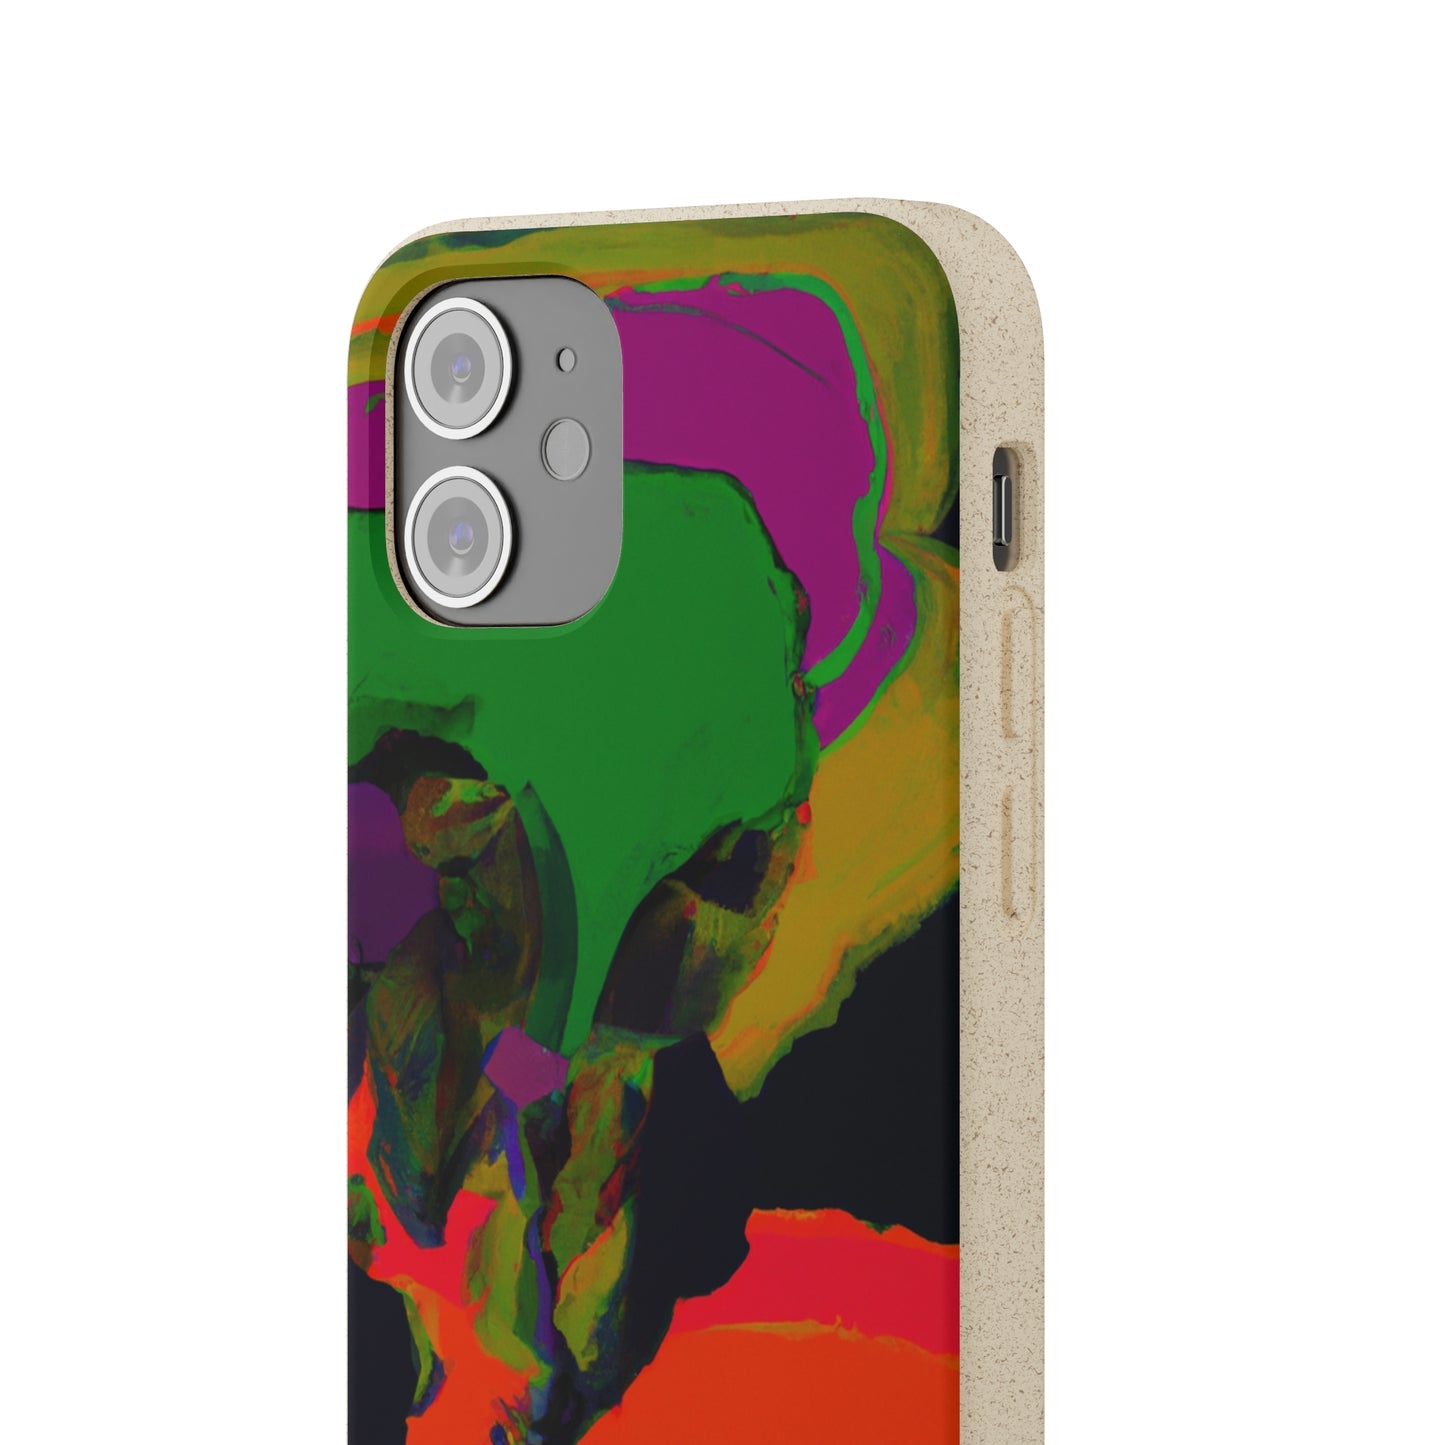 "Multilayered Palette: A Colorful Exploration of Textural Contrast" - Bam Boo! Lifestyle Eco-friendly Cases